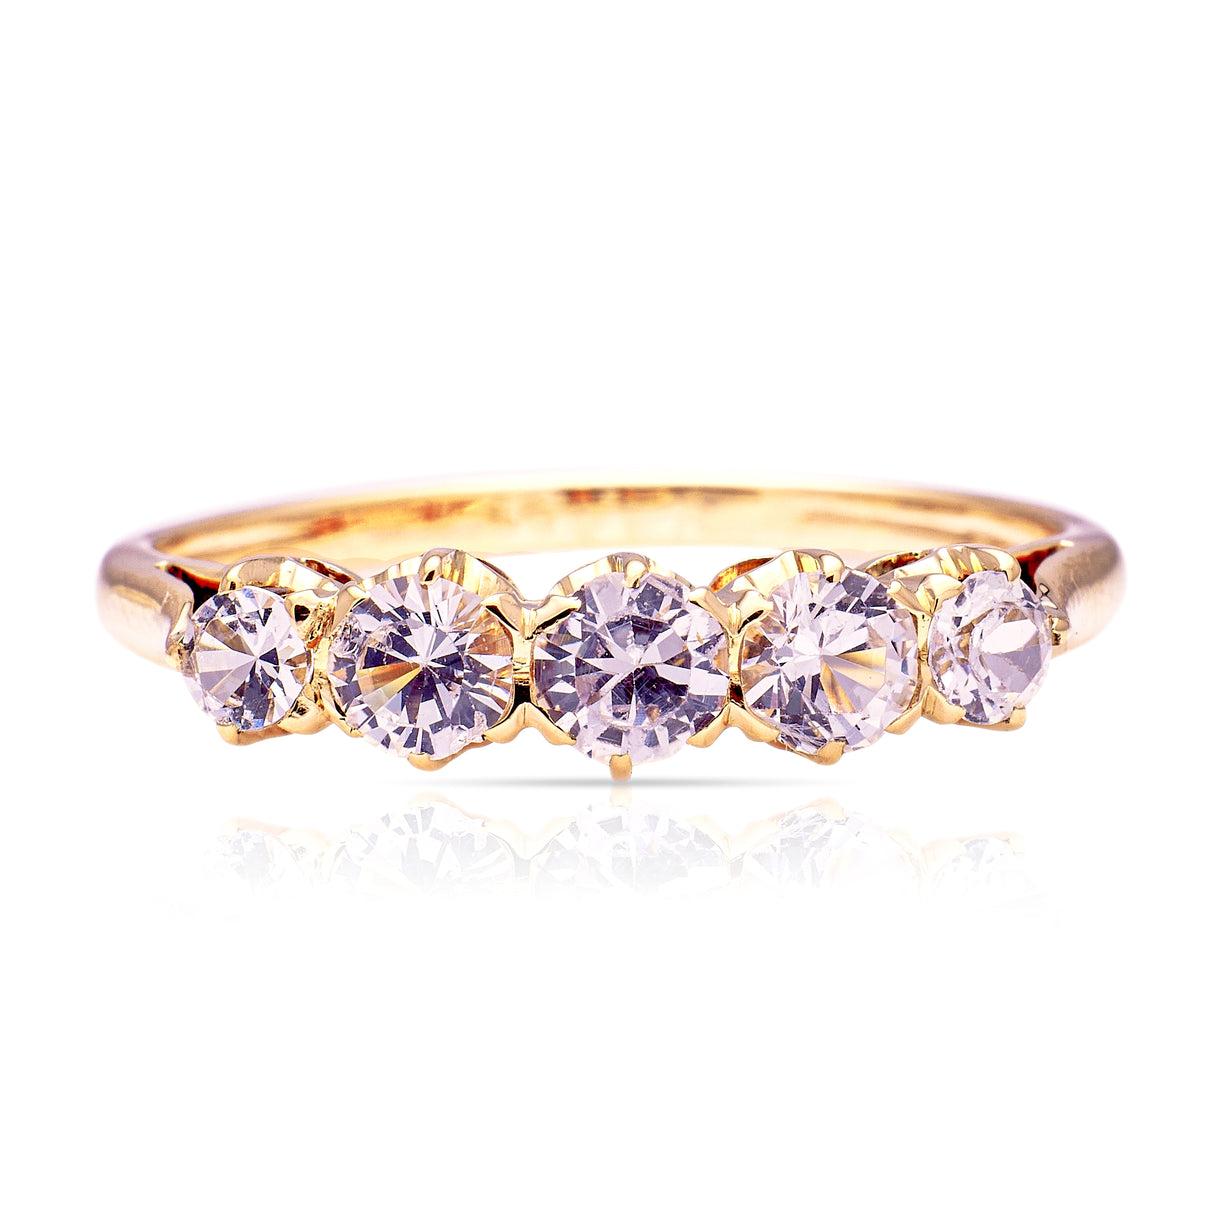 Antique, Edwardian five-stone white sapphire ring, 15ct yellow gold